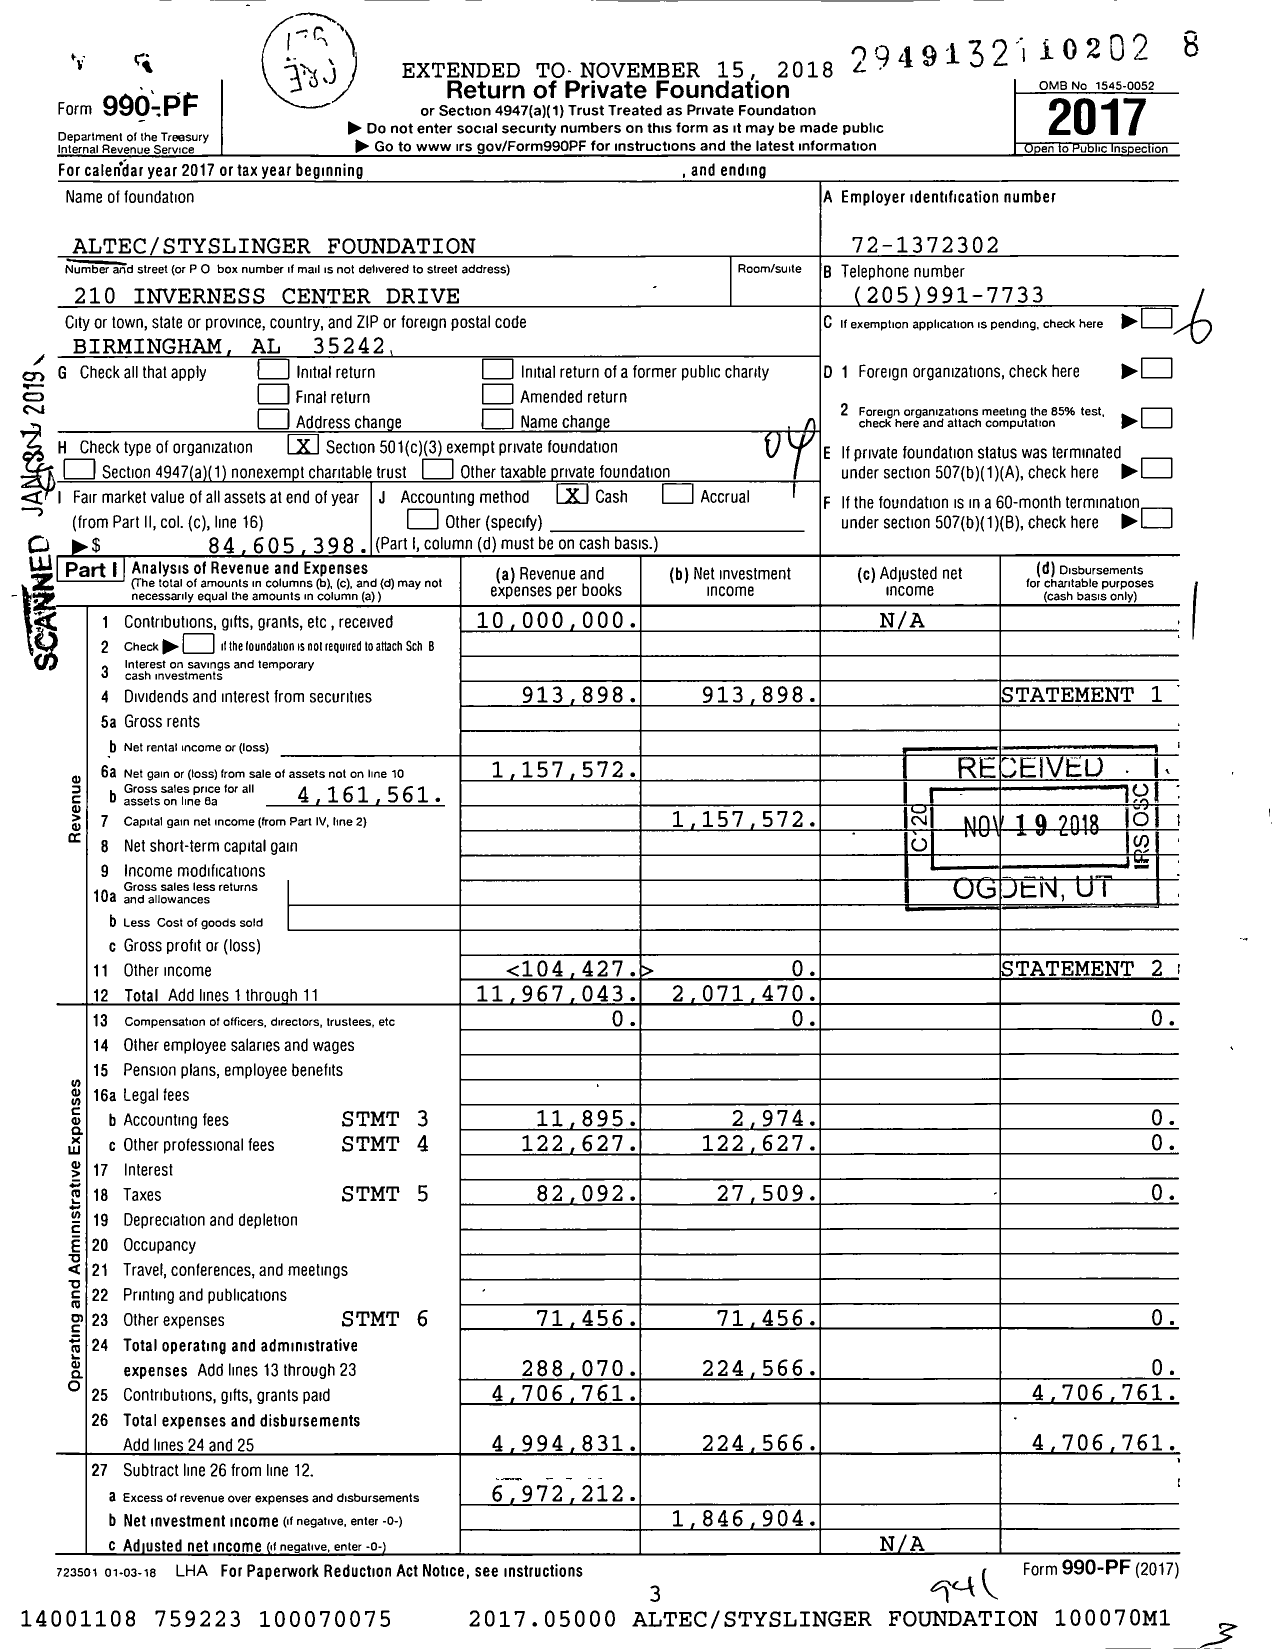 Image of first page of 2017 Form 990PF for Altecstyslinger Foundation